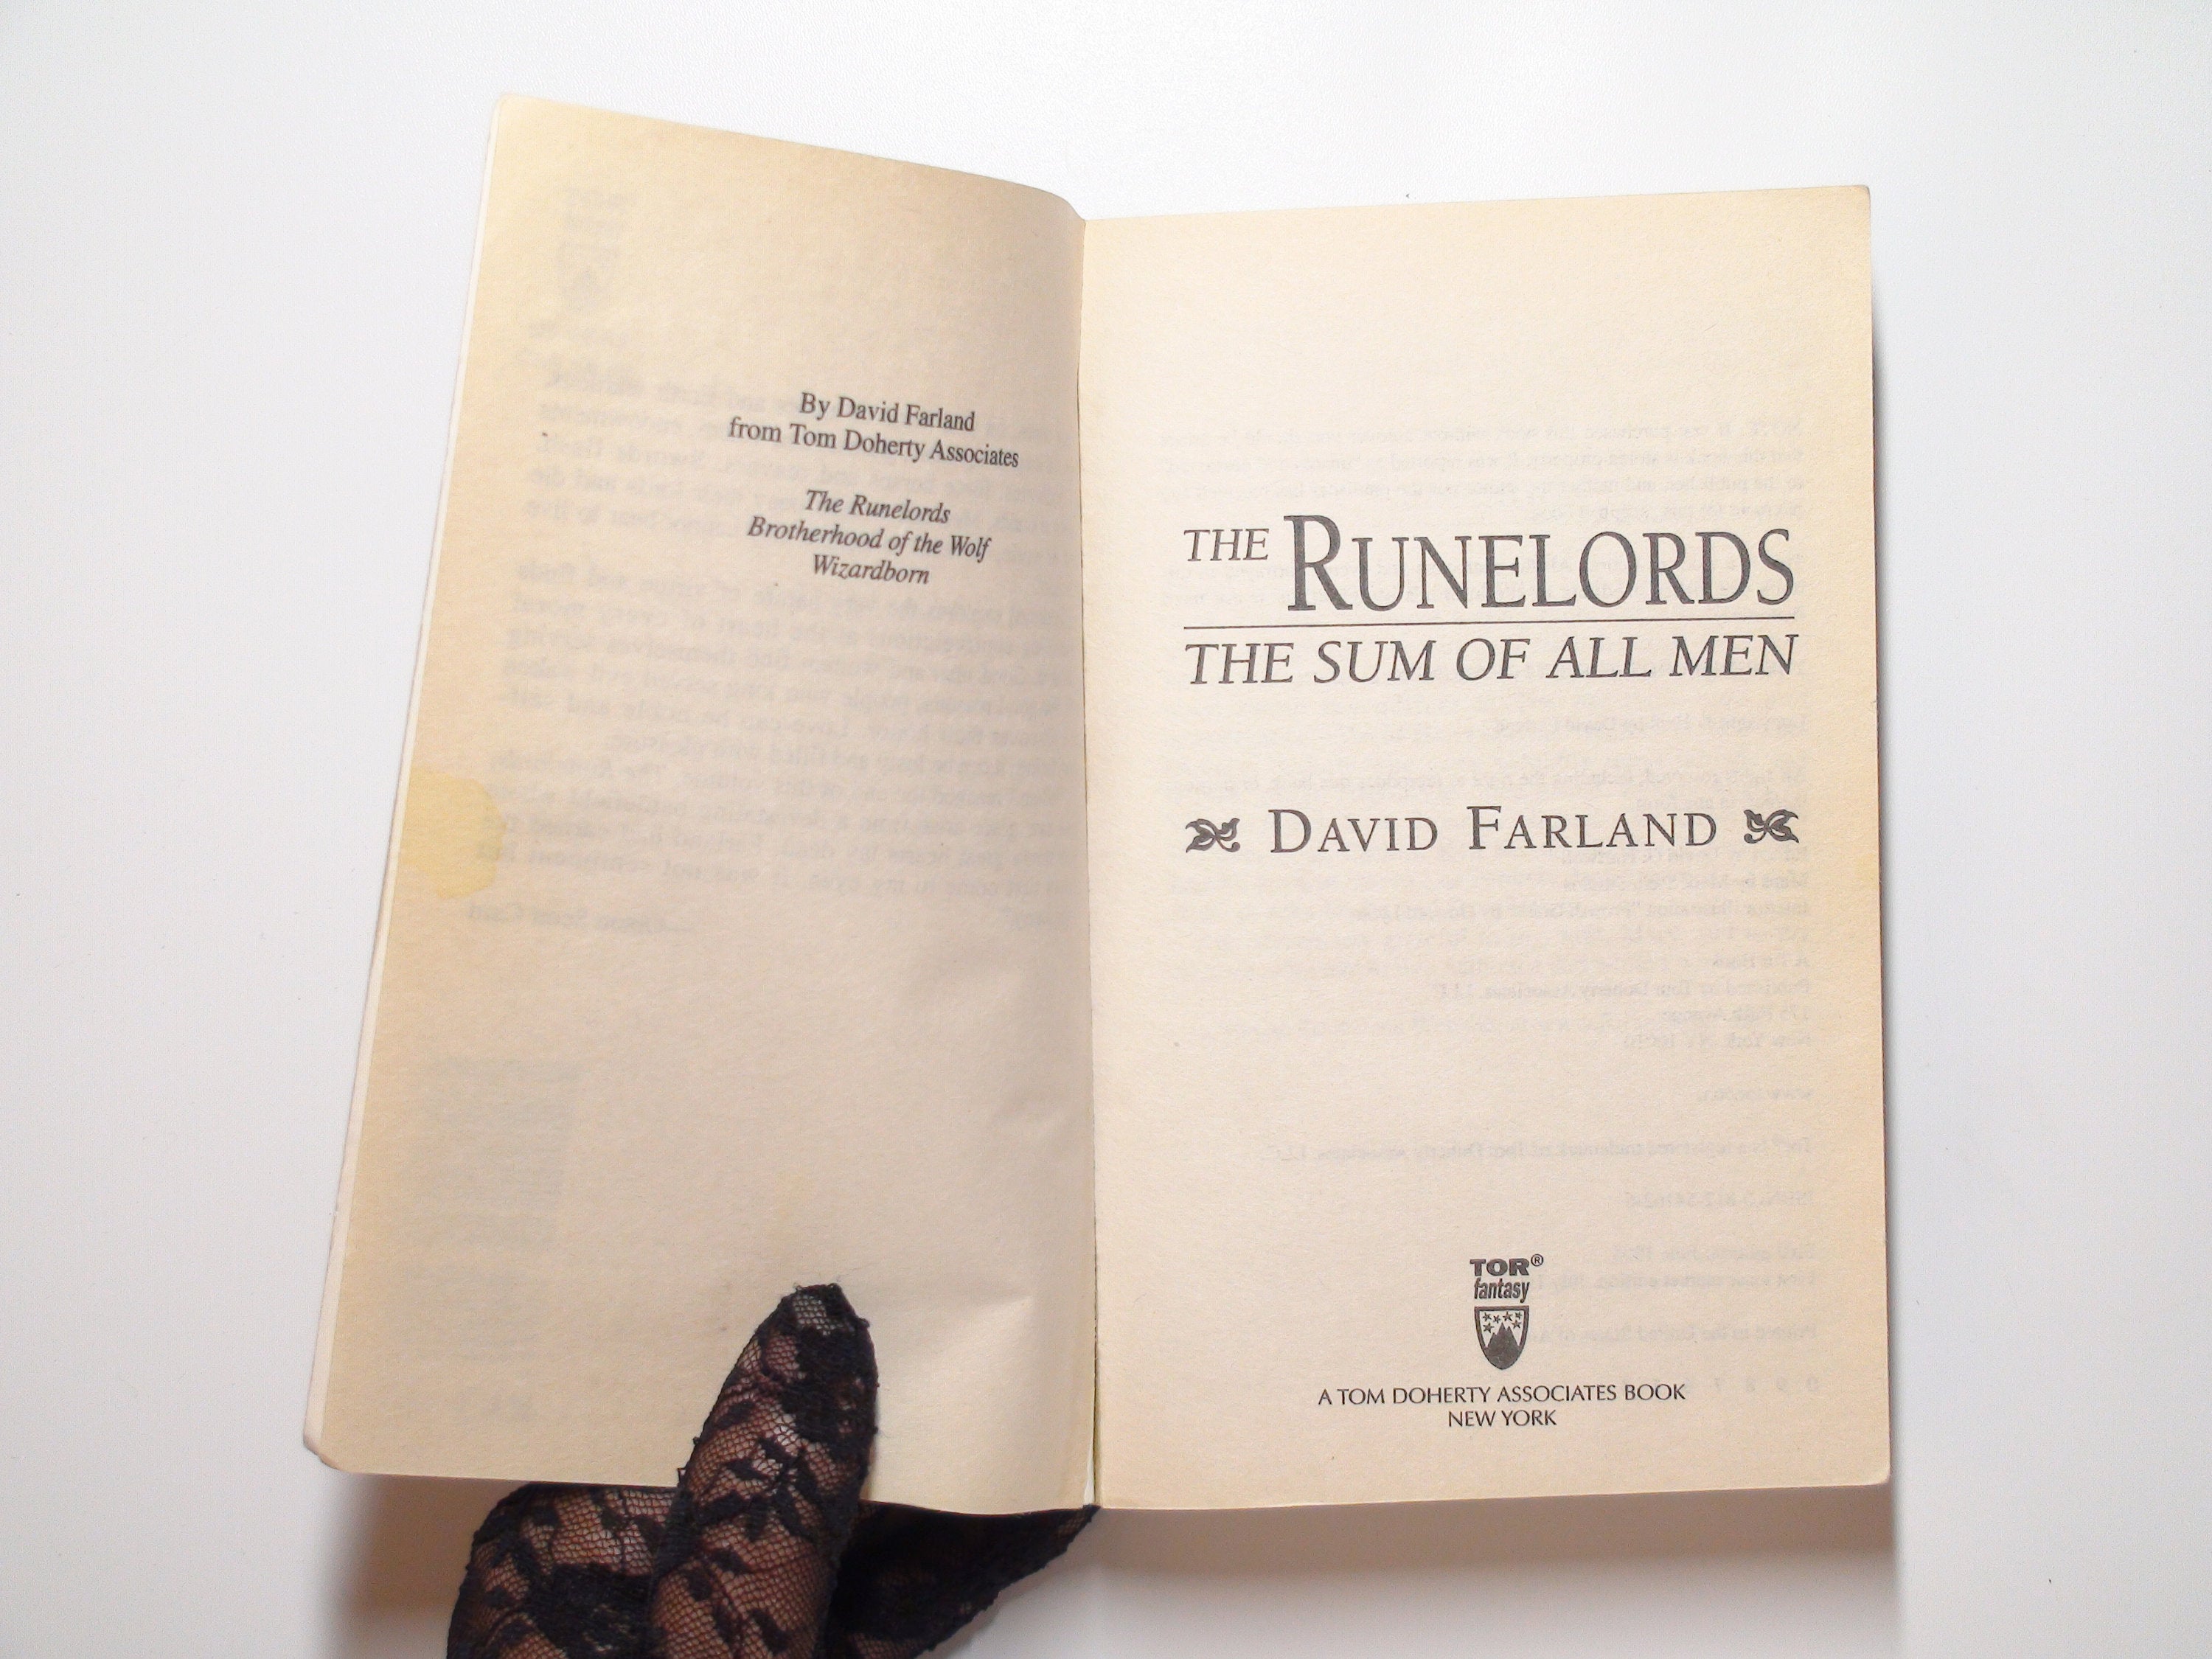 The Runelords, The Sum of All Men, David Farland, Paperback, 1998